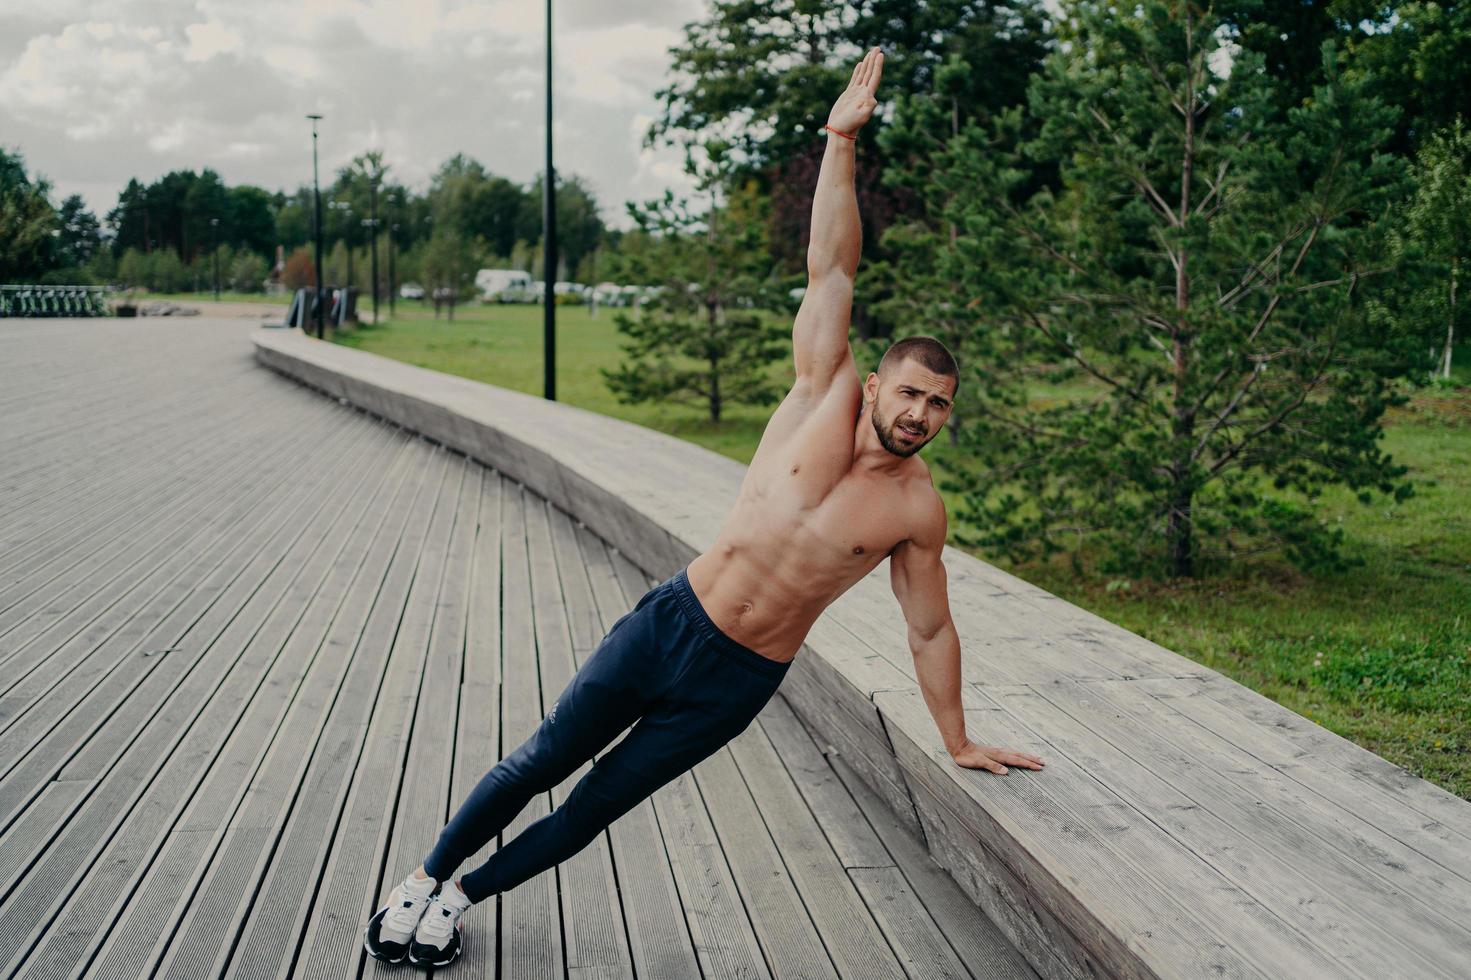 Athletic man stands in side plank pose, raises one arm, poses with shirtless torso, wears trousers and sneaks. Sportsman exercises in park on fresh air, has perfect fit muscles body. Healthy lifestyle photo